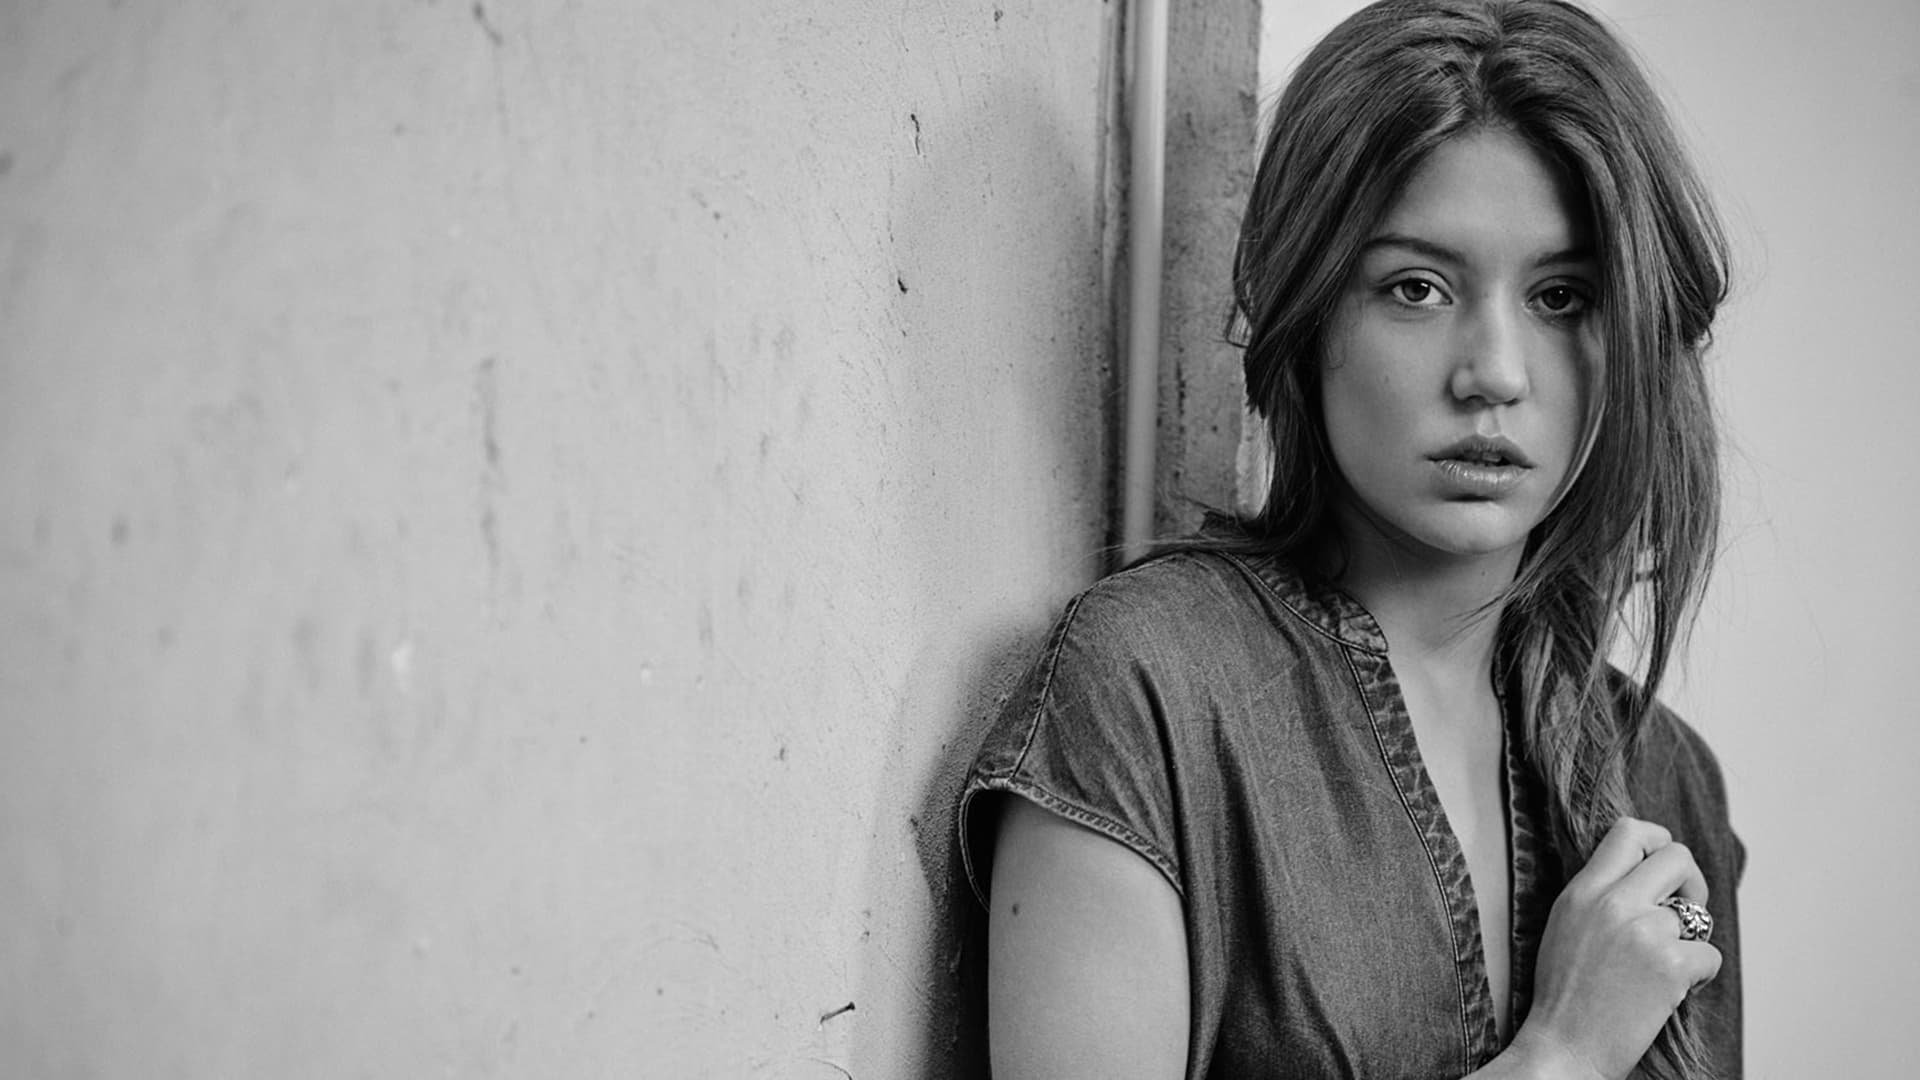 1920x1080 adele exarchopoulos new full hd wallpaper  Adele exarchopoulos,  Blue is the warmest colour, Women